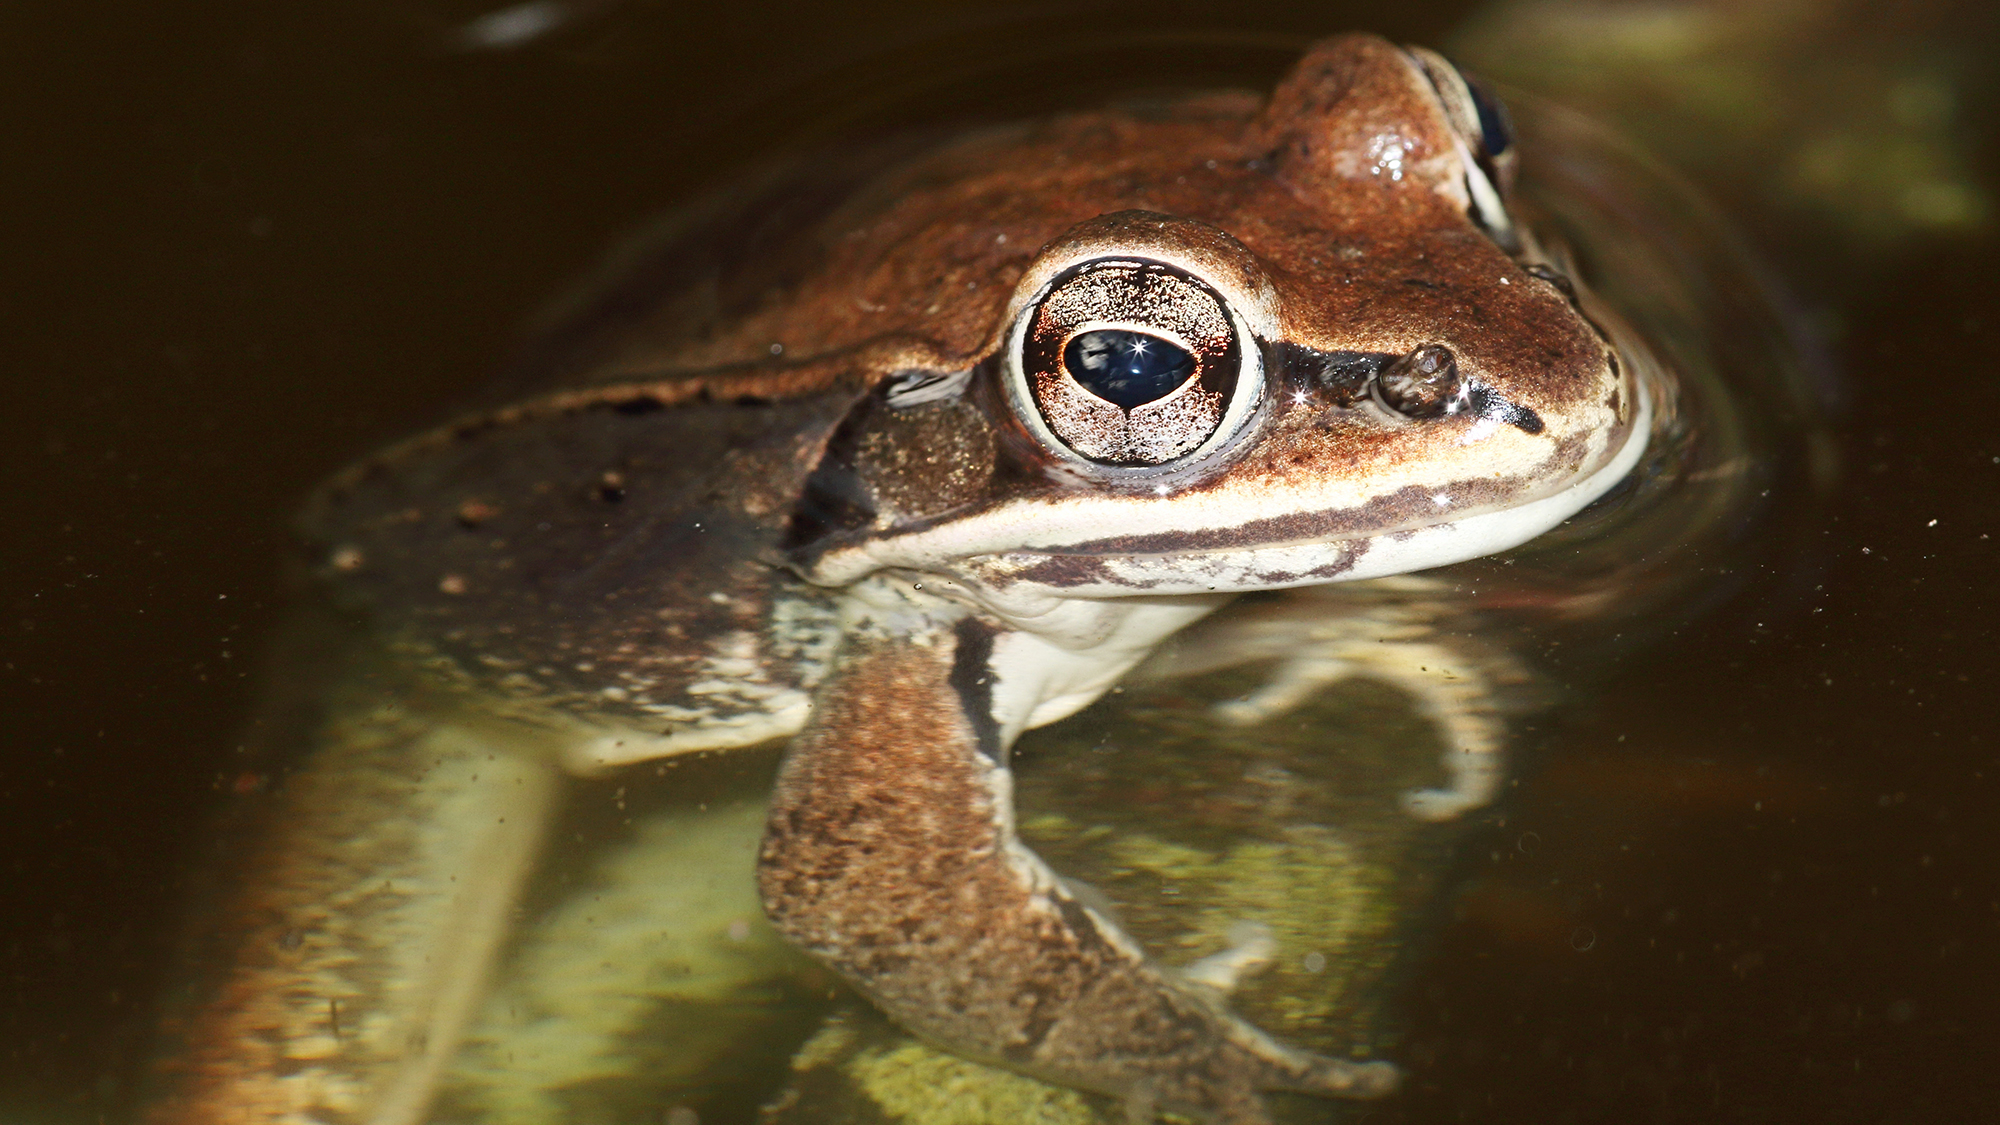 These frogs may be evolving because of road salt